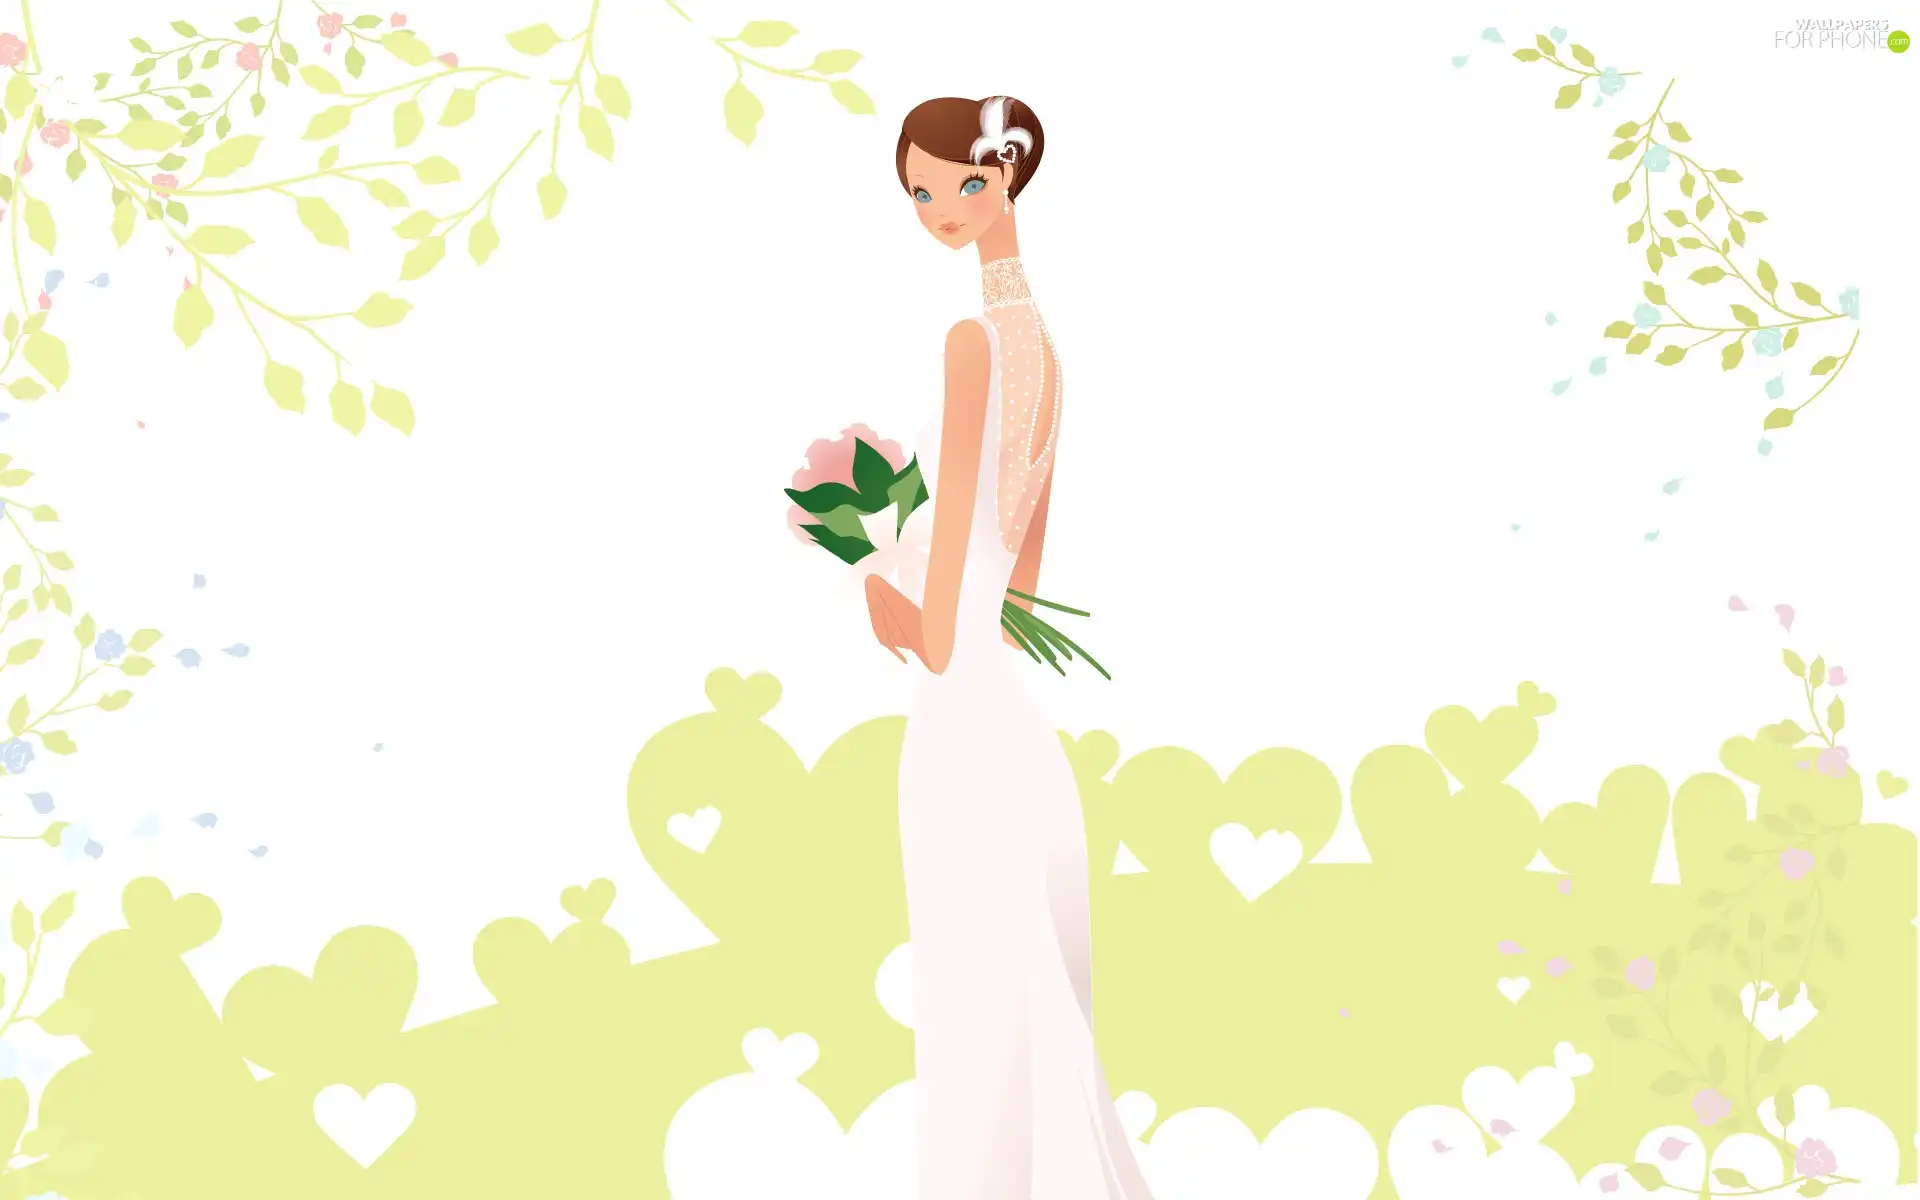 lady, bouquet, wedded, young